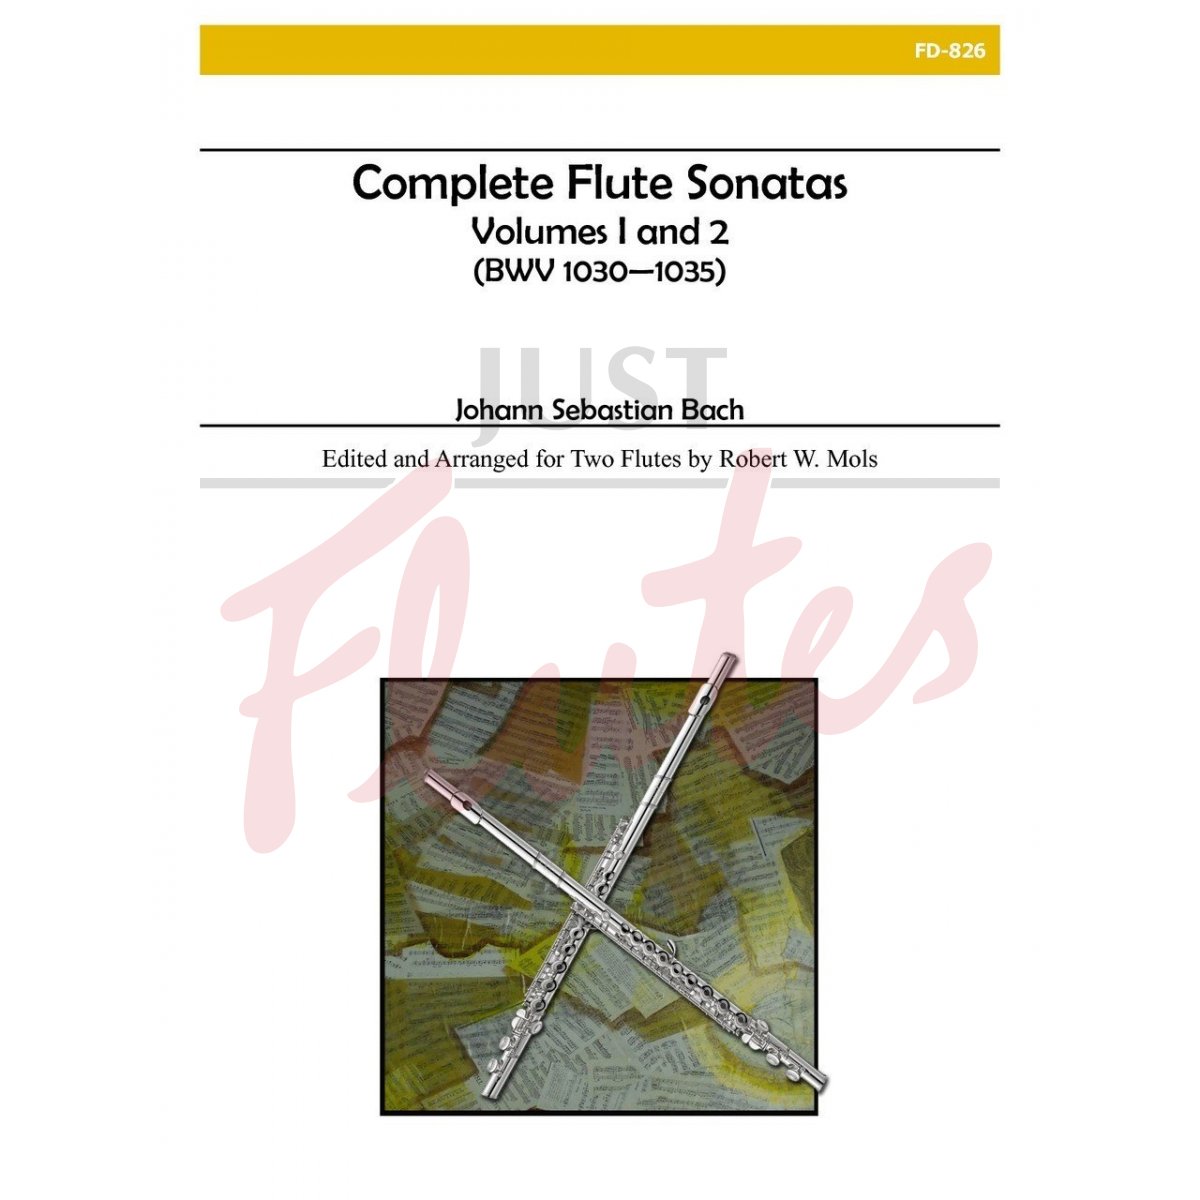 Complete Flute Sonatas arranged for Two Flutes, Volumes 1 and 2